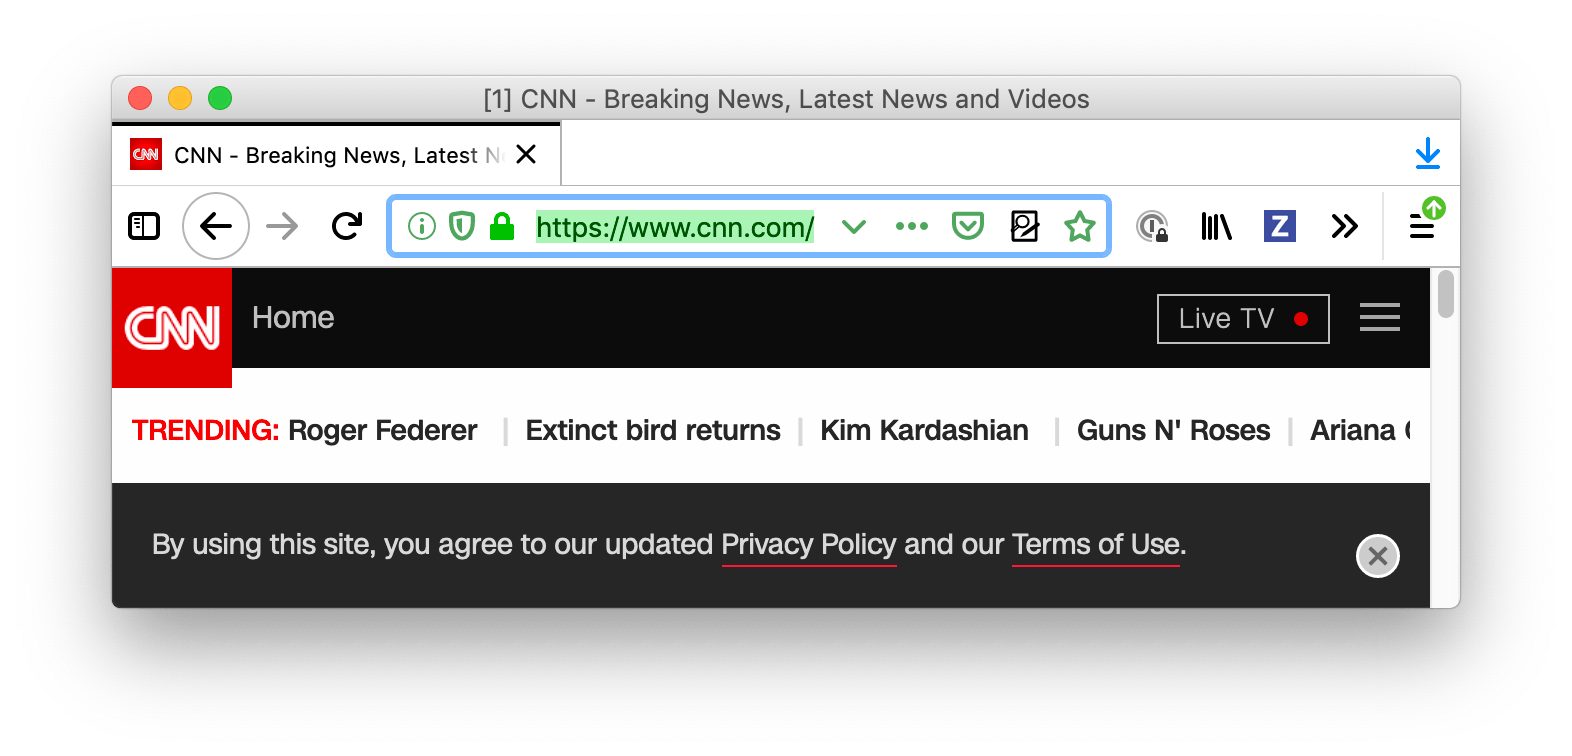 Browser firefox is white. Browser's tab and URL bar are white with text and icons in black. The URL bar field is focused and outlined in blue and URL bar text is selected.